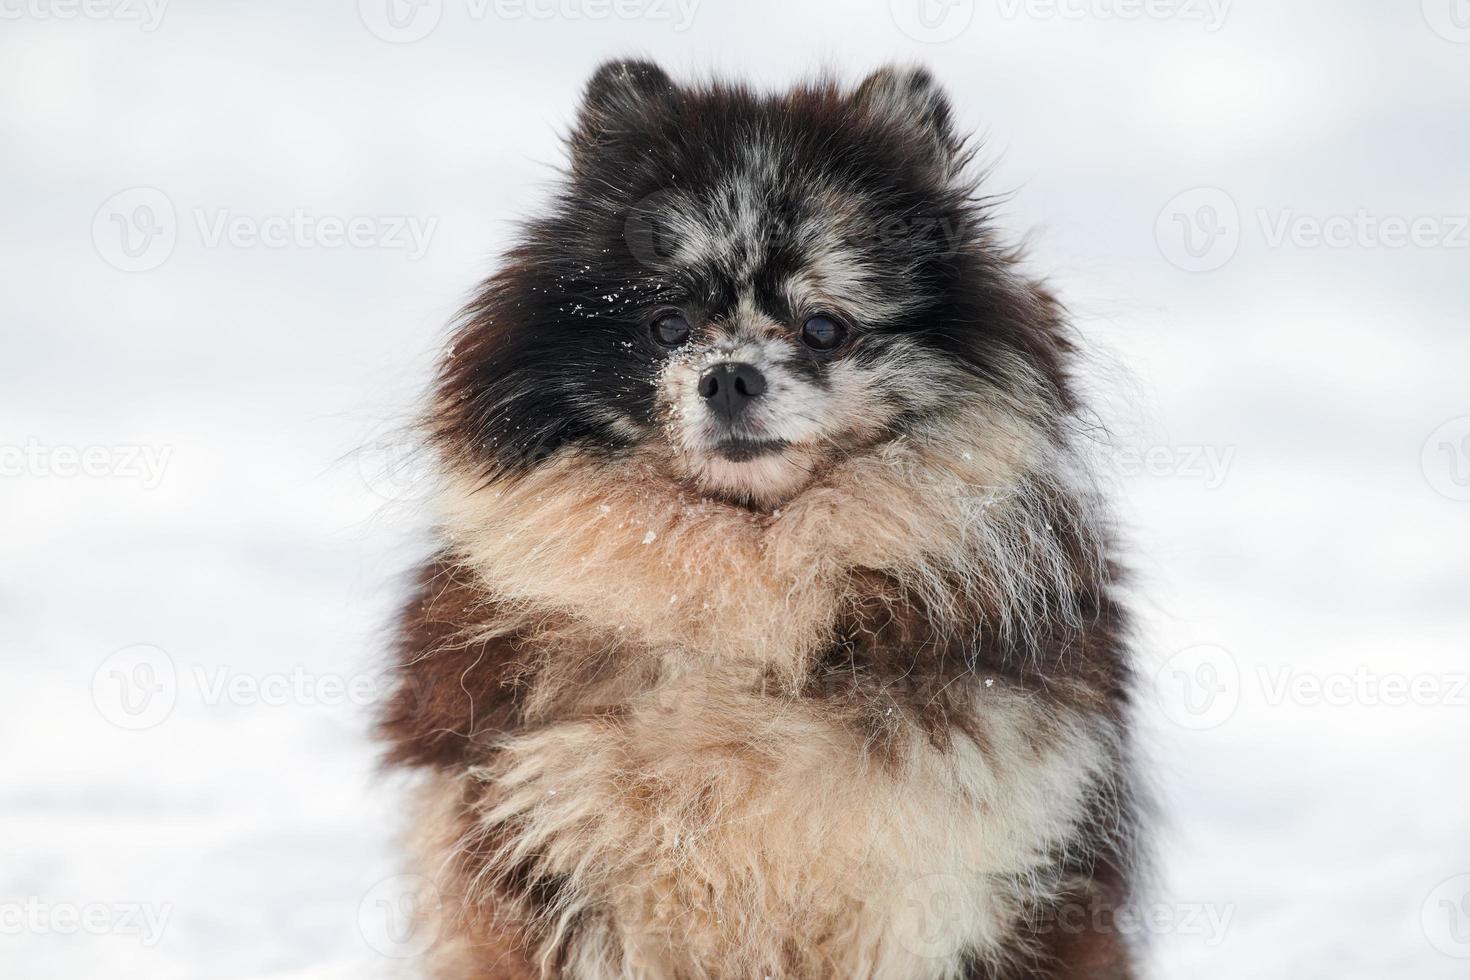 Pomeranian Spitz dog close up winter portrait on snow background, cute black marble with tan puppy photo